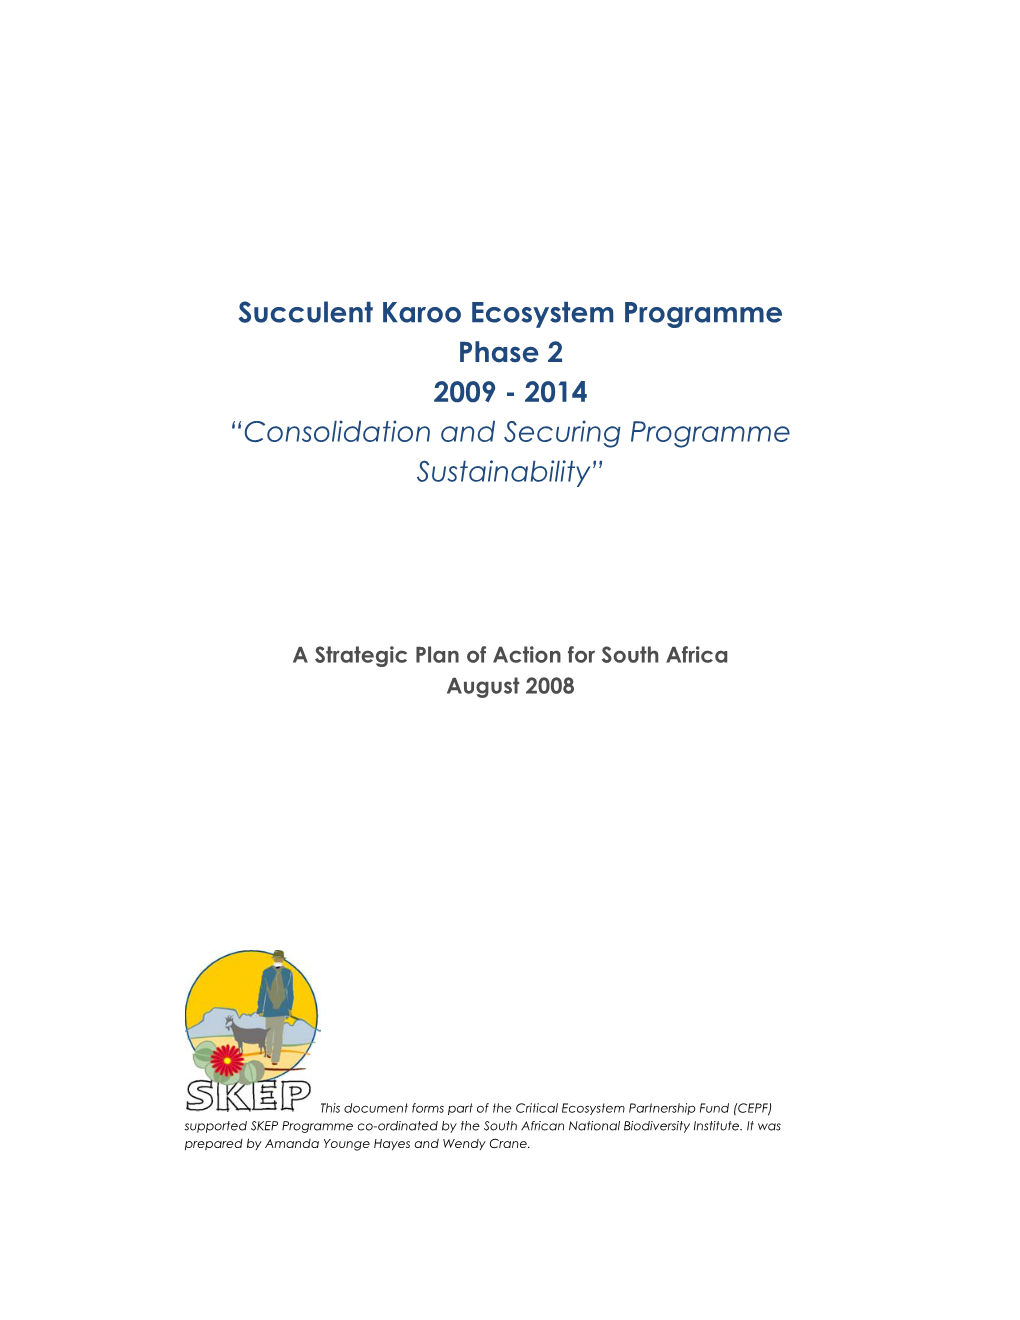 Succulent Karoo Ecosystem Programme Phase Two 2009- 2014